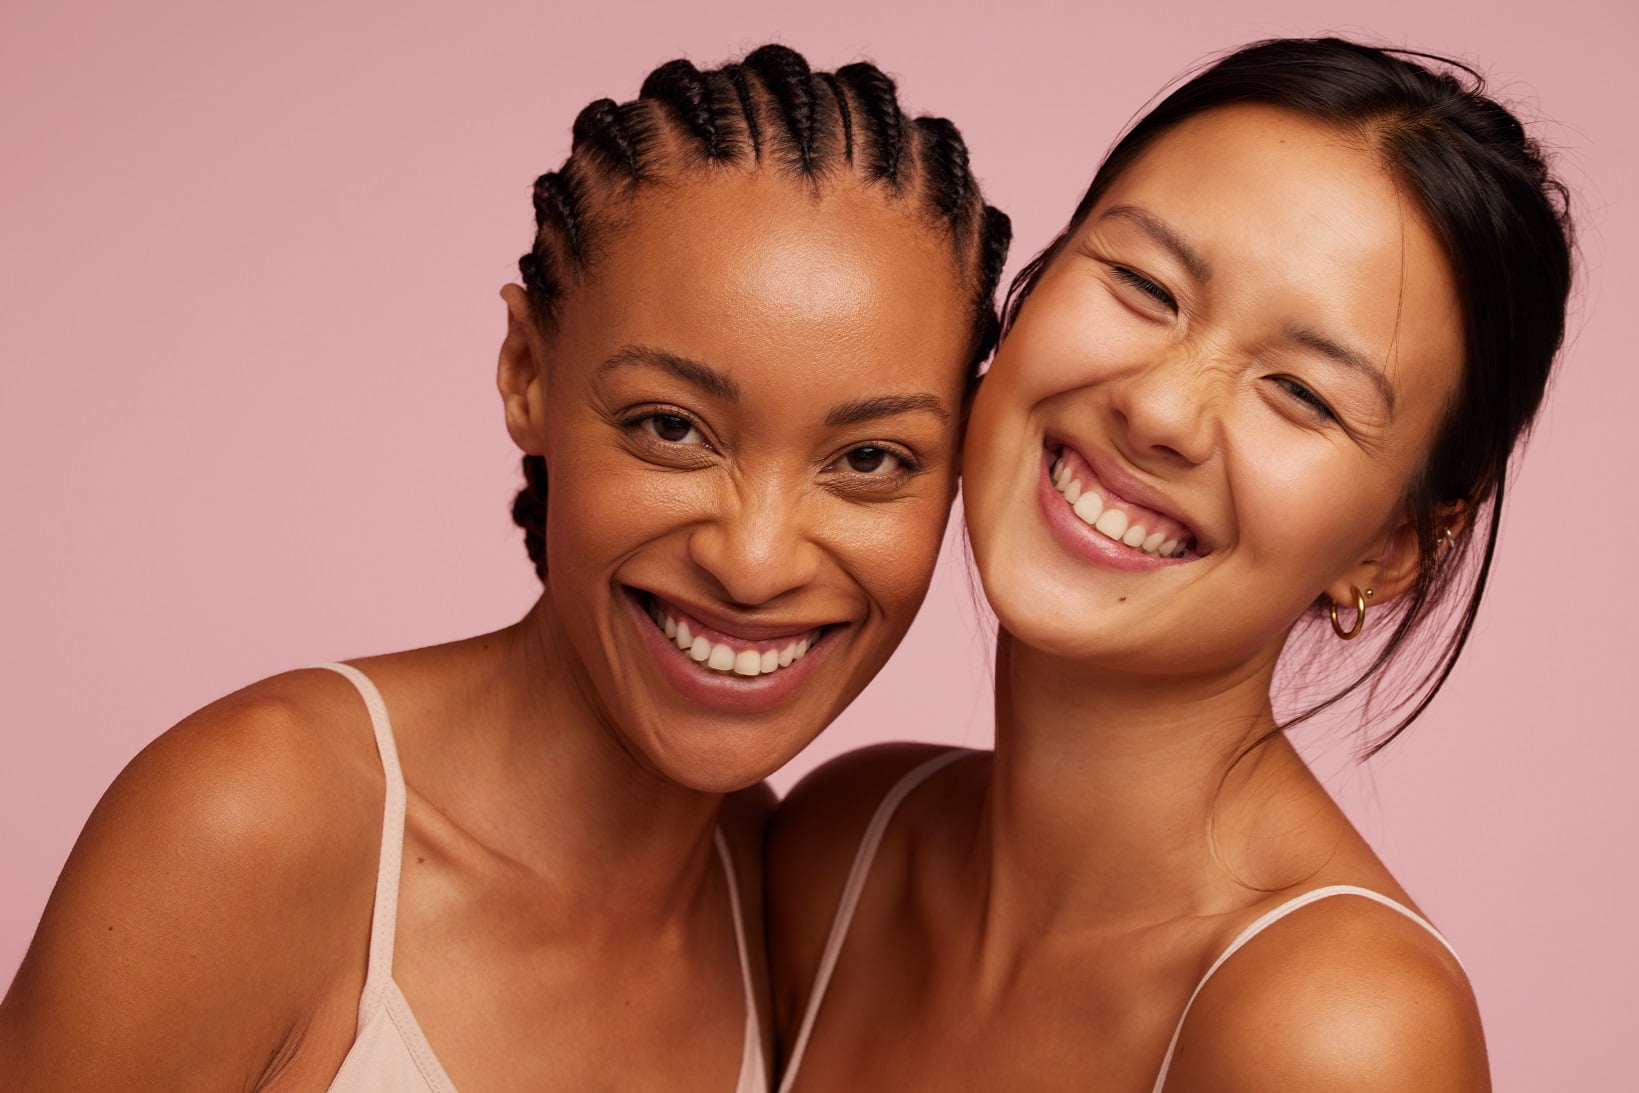 Asian and African Beautiful Smiling Woman | Avail Aesthetics in wake Forest, Raleigh, & Cary, NC